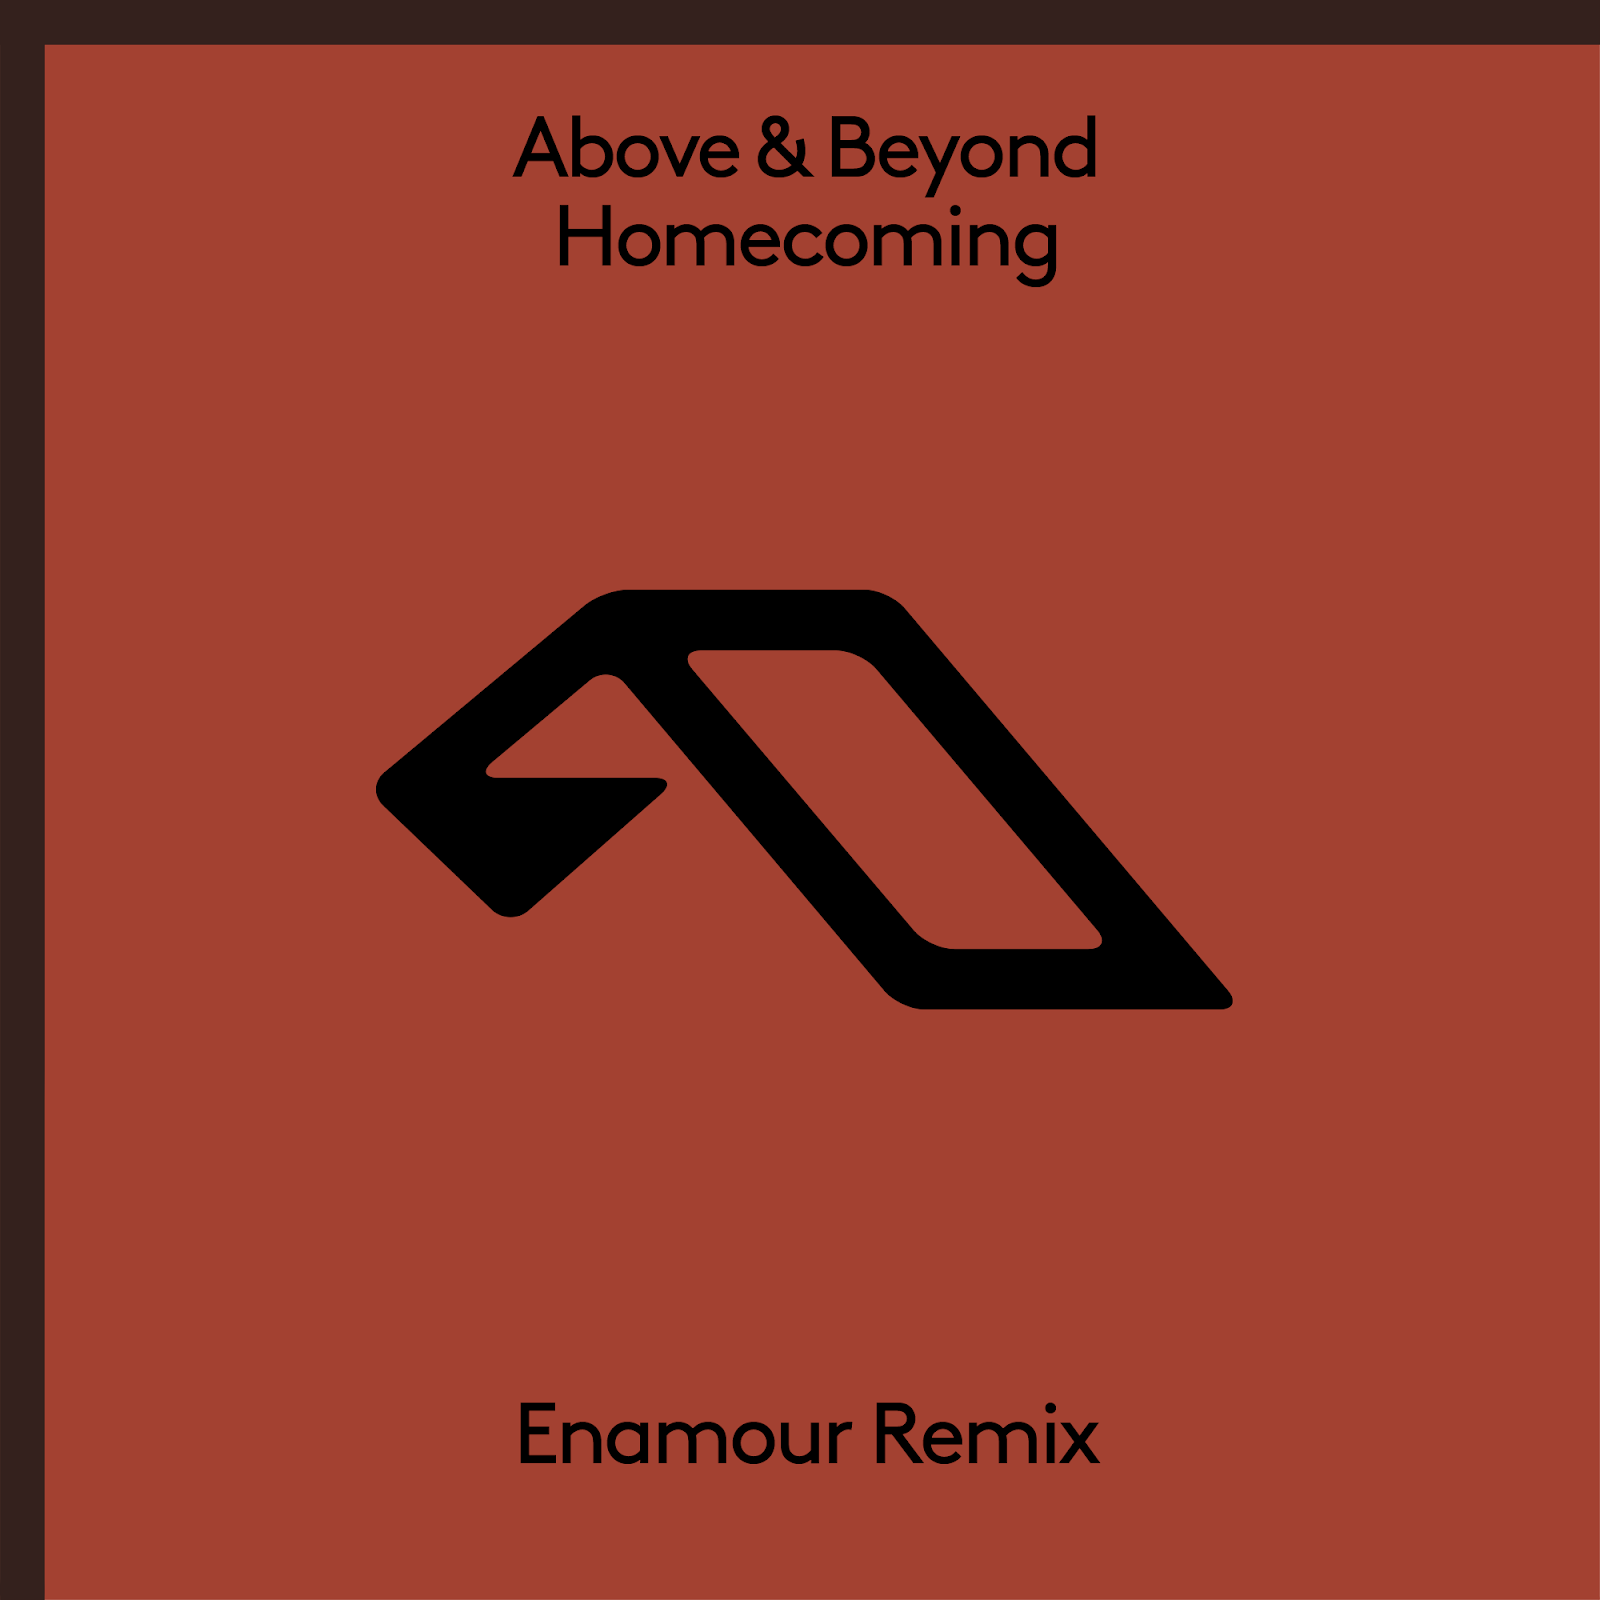 Above & Beyond presents Homecoming (Enamour Remix) on Anjunabeats